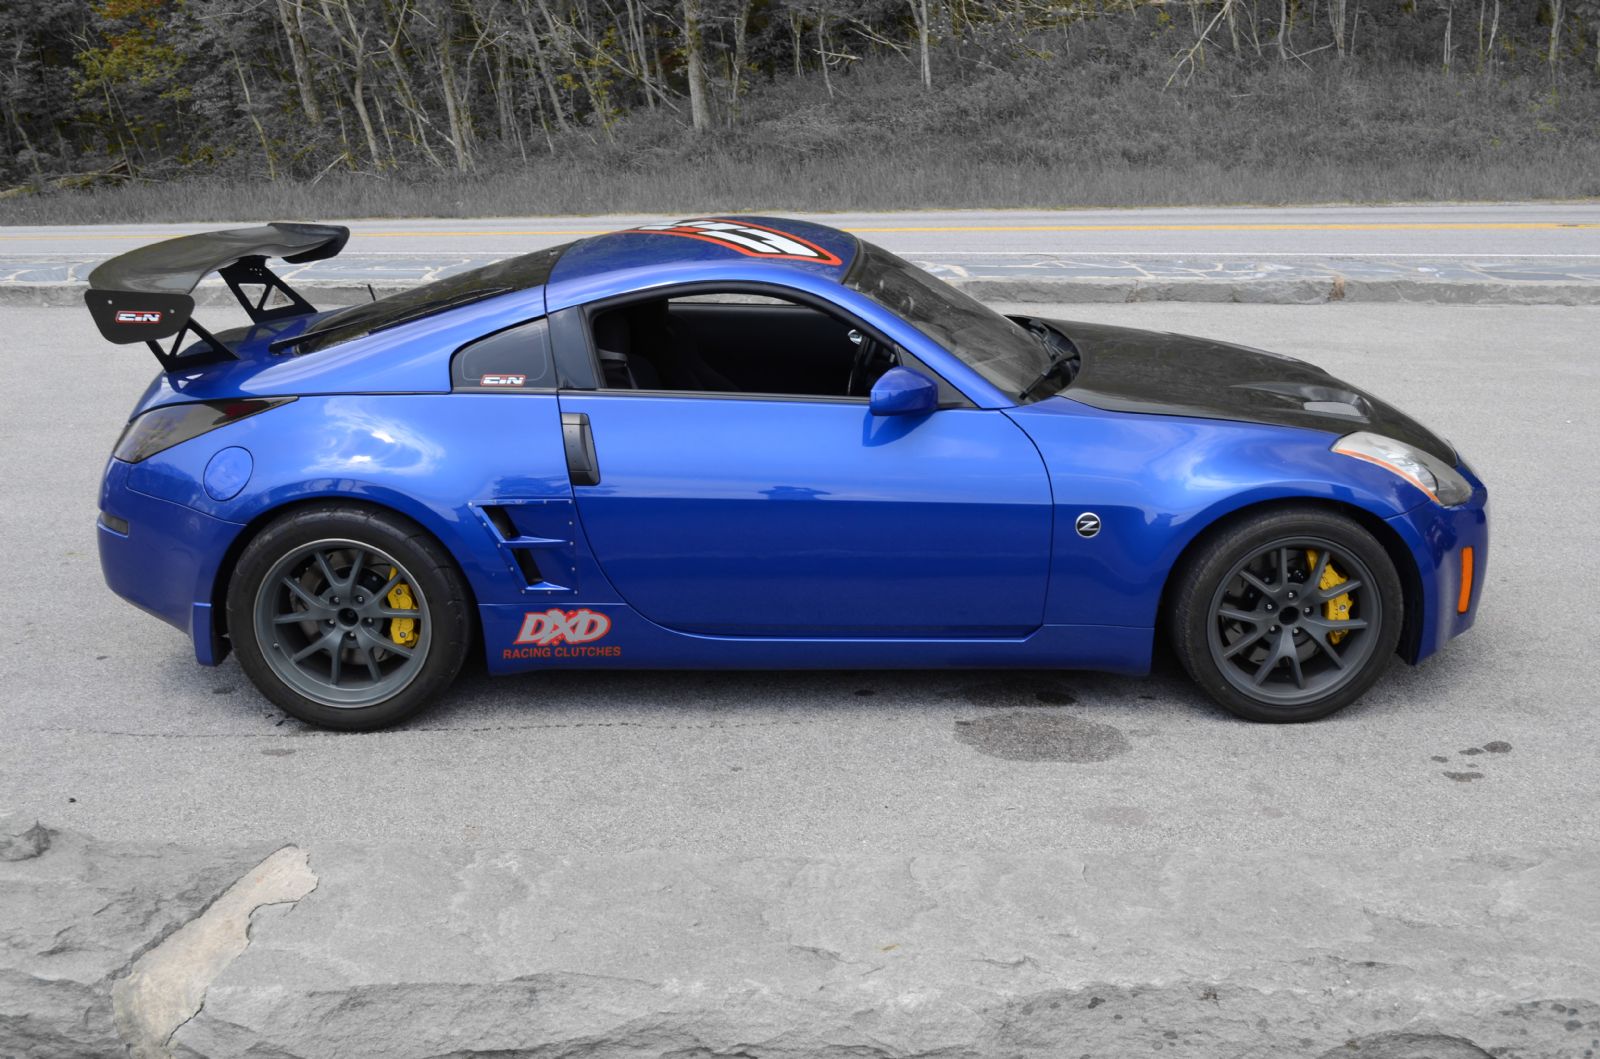 Modified nissan 350z for sale uk #1